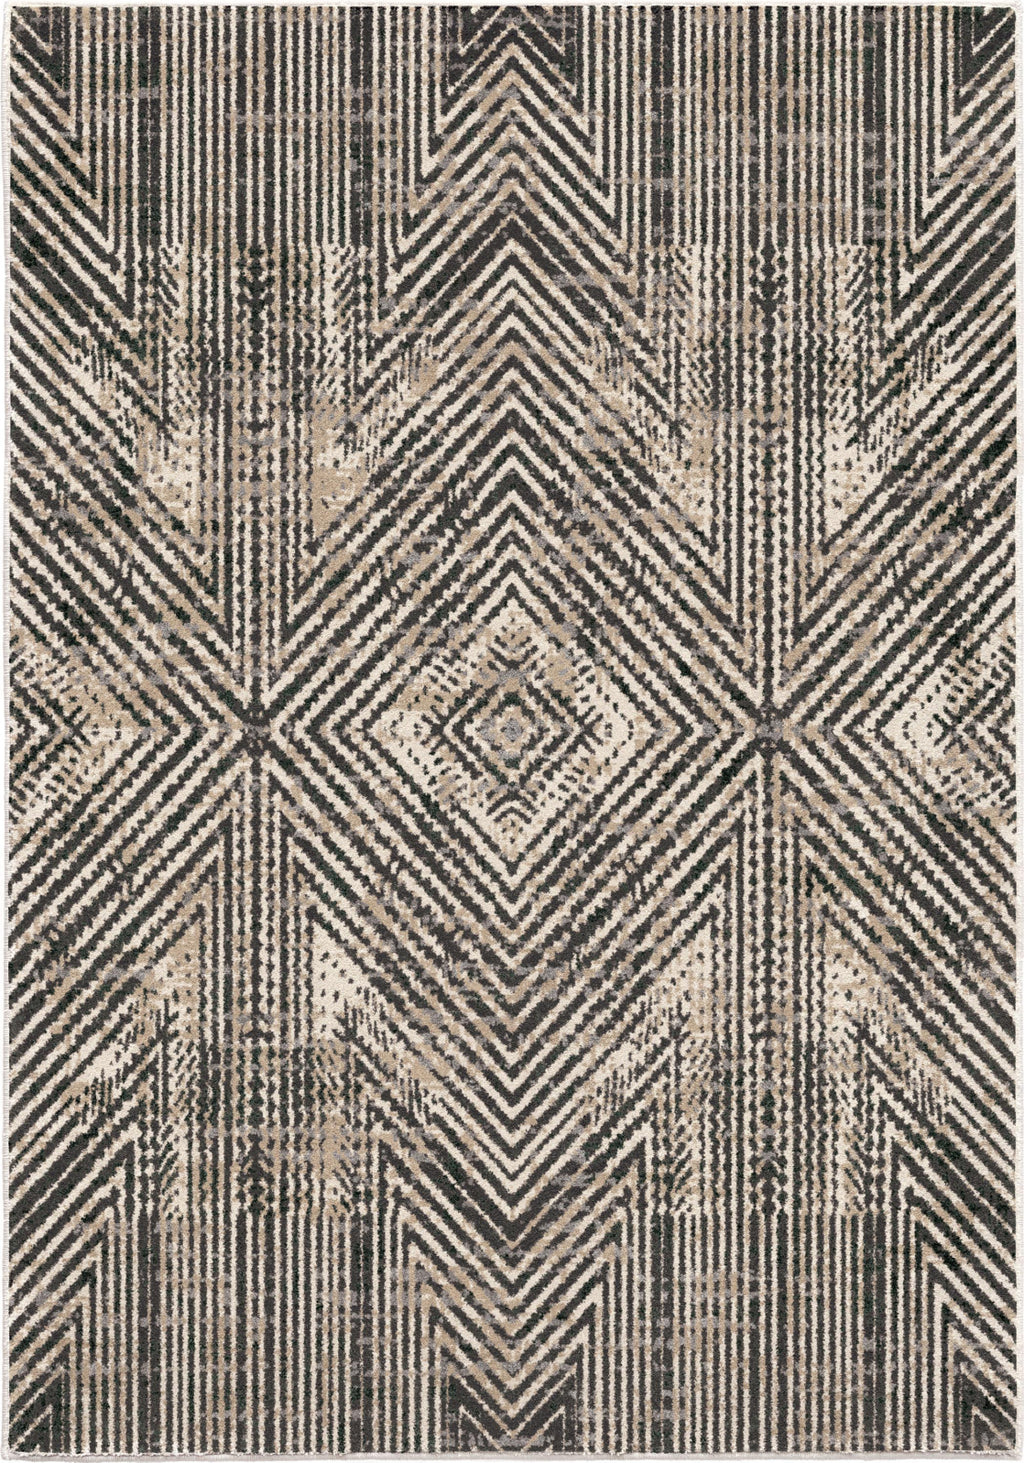 Orian Rugs Riverstone Zero In Moonlight Area Rug by Palmetto Living